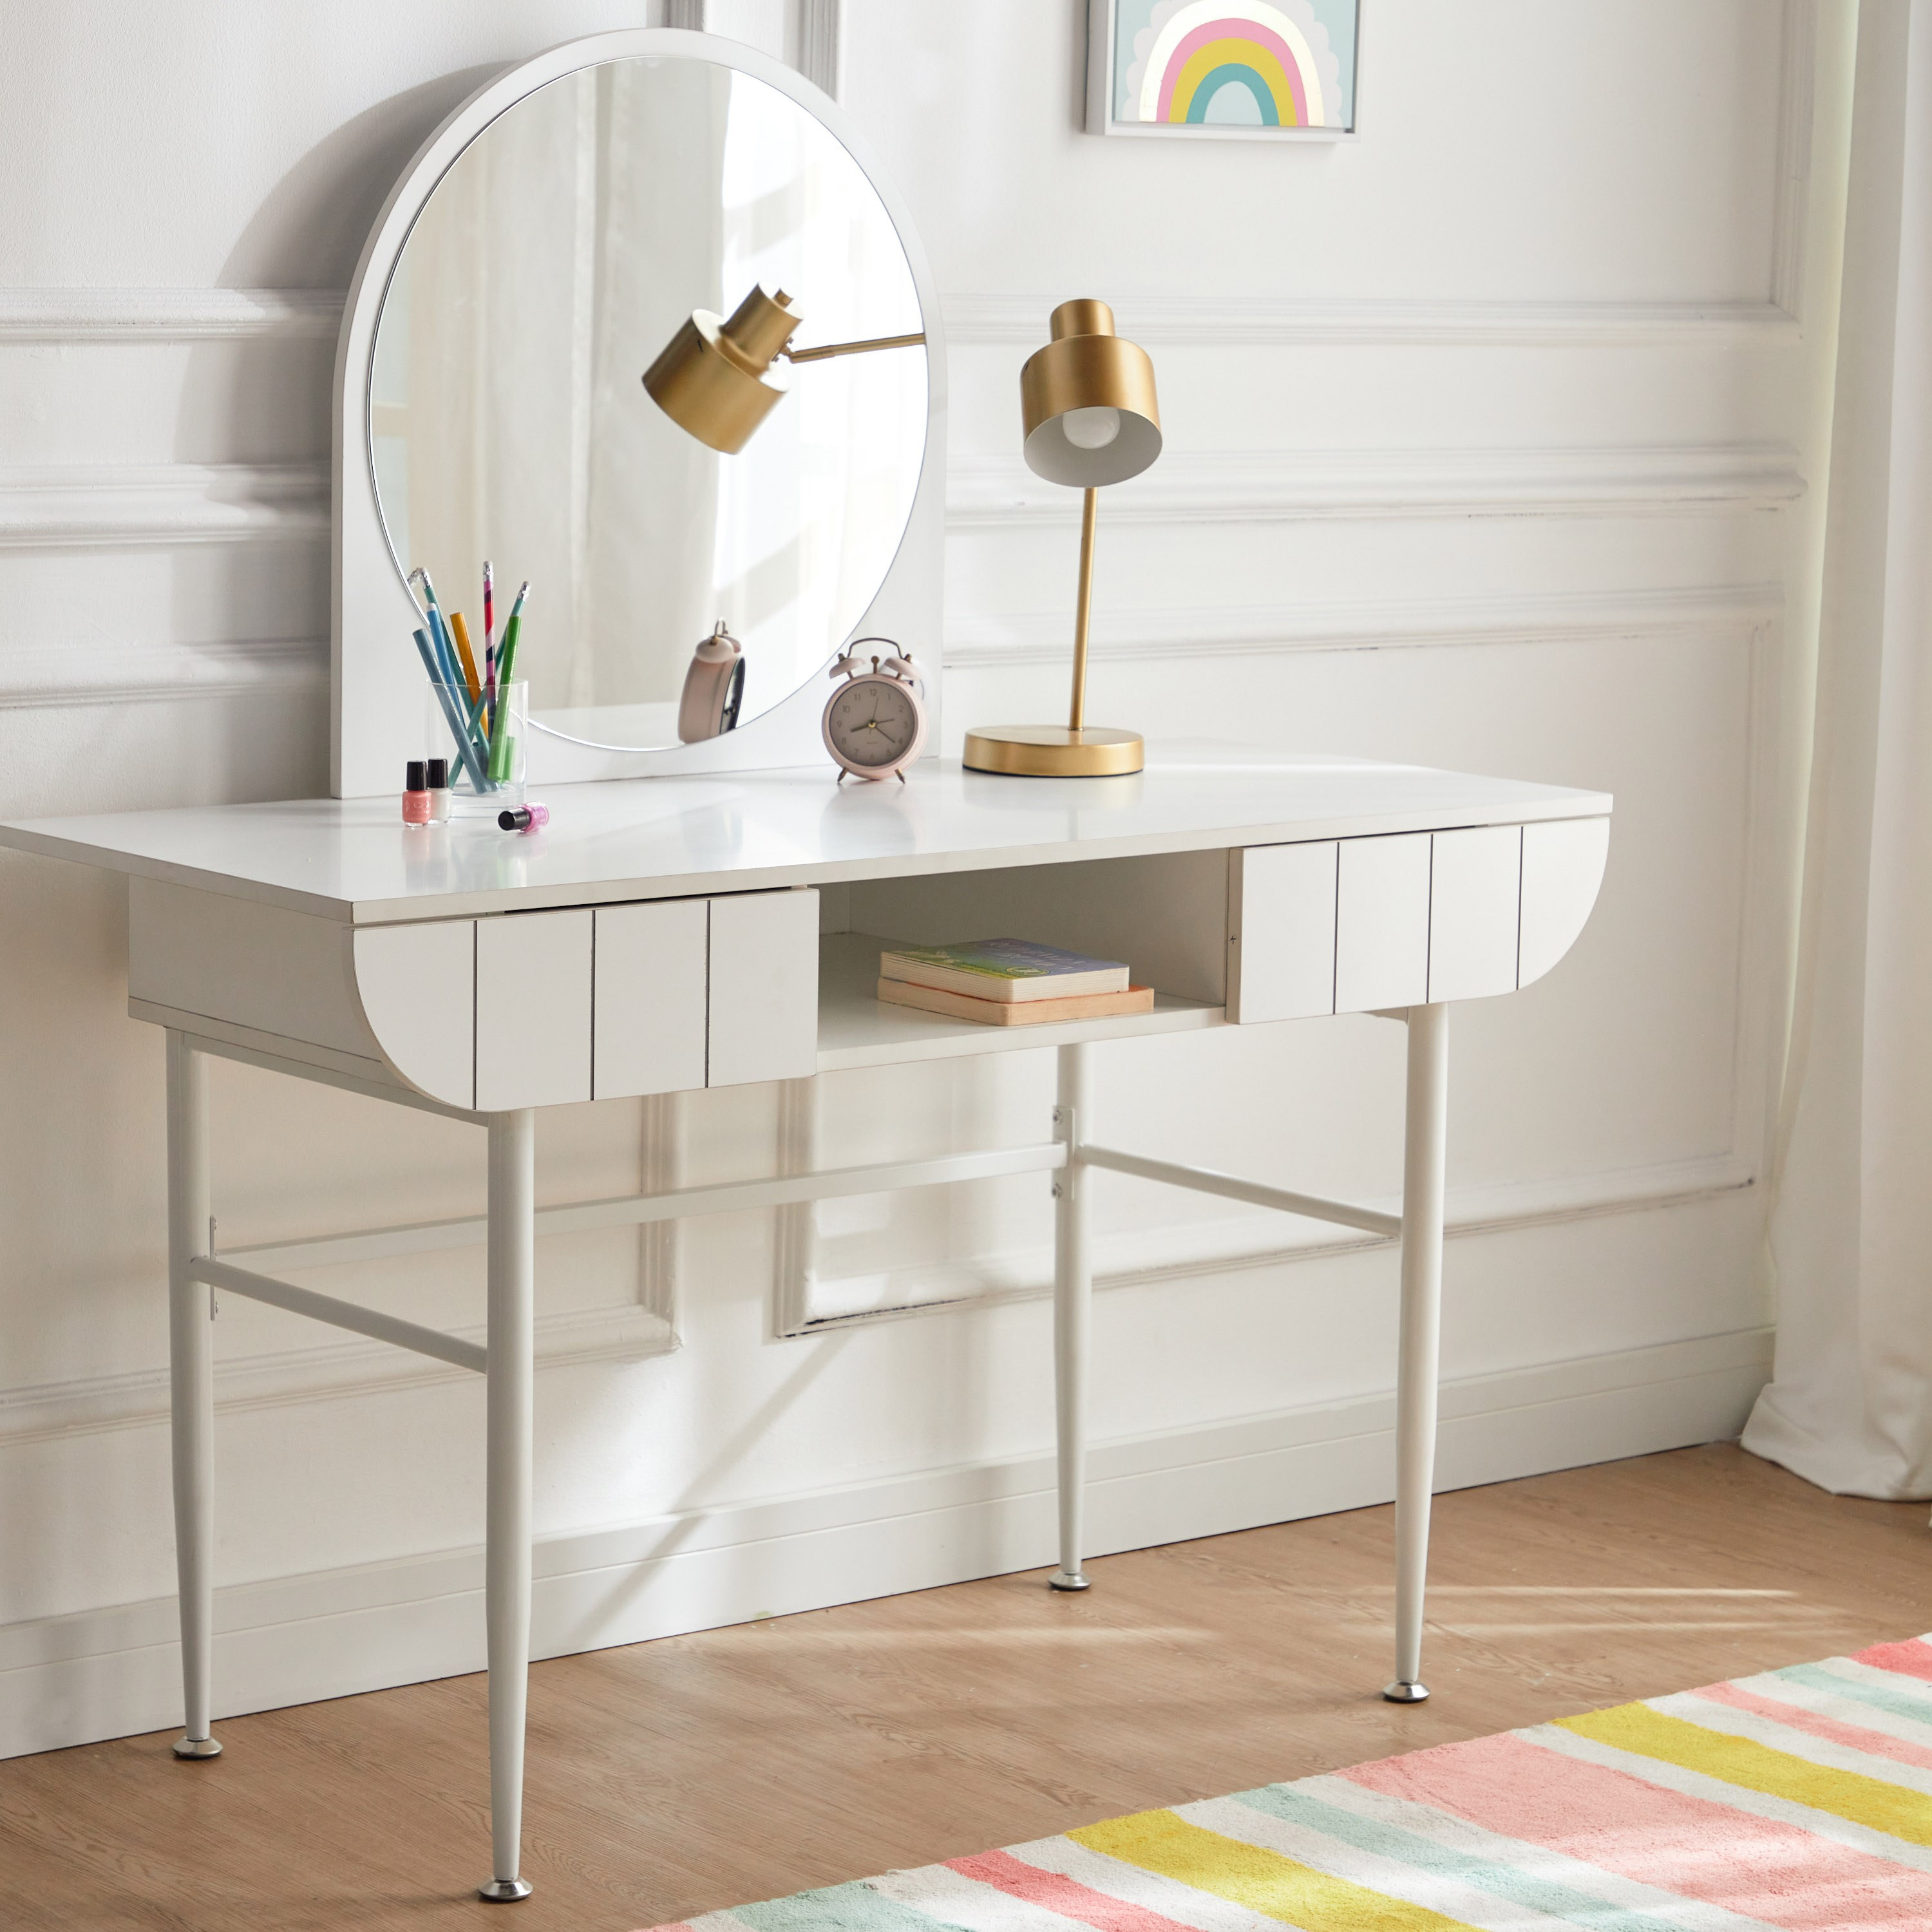 Pan Home Monolite Dressing Table With Mirror | Sharjah Co-operative Society